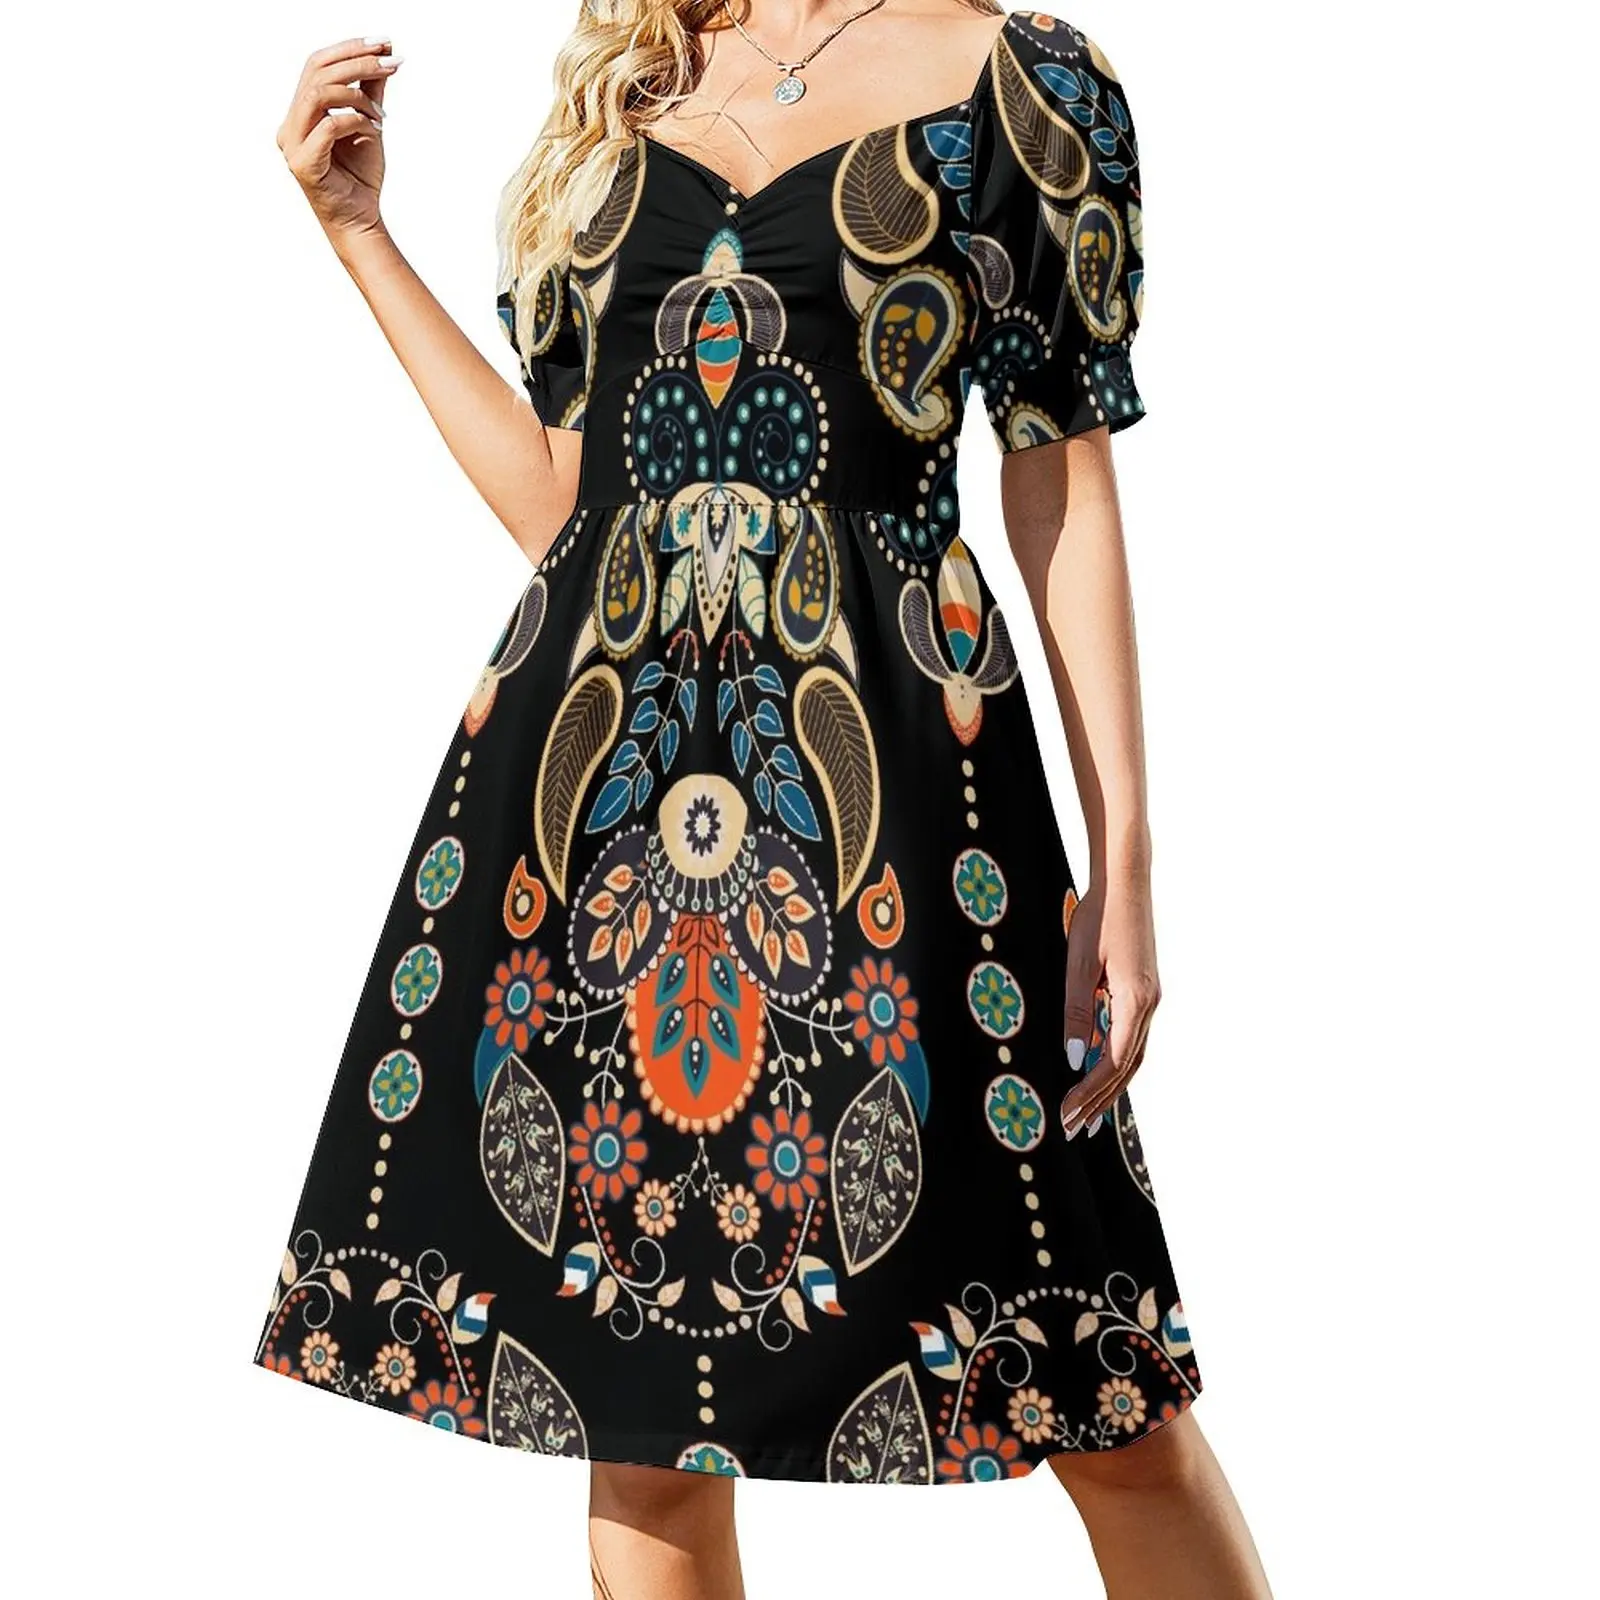 

Exquisite Seamless Paisley Pattern Dress dresses korean style dresses for woman